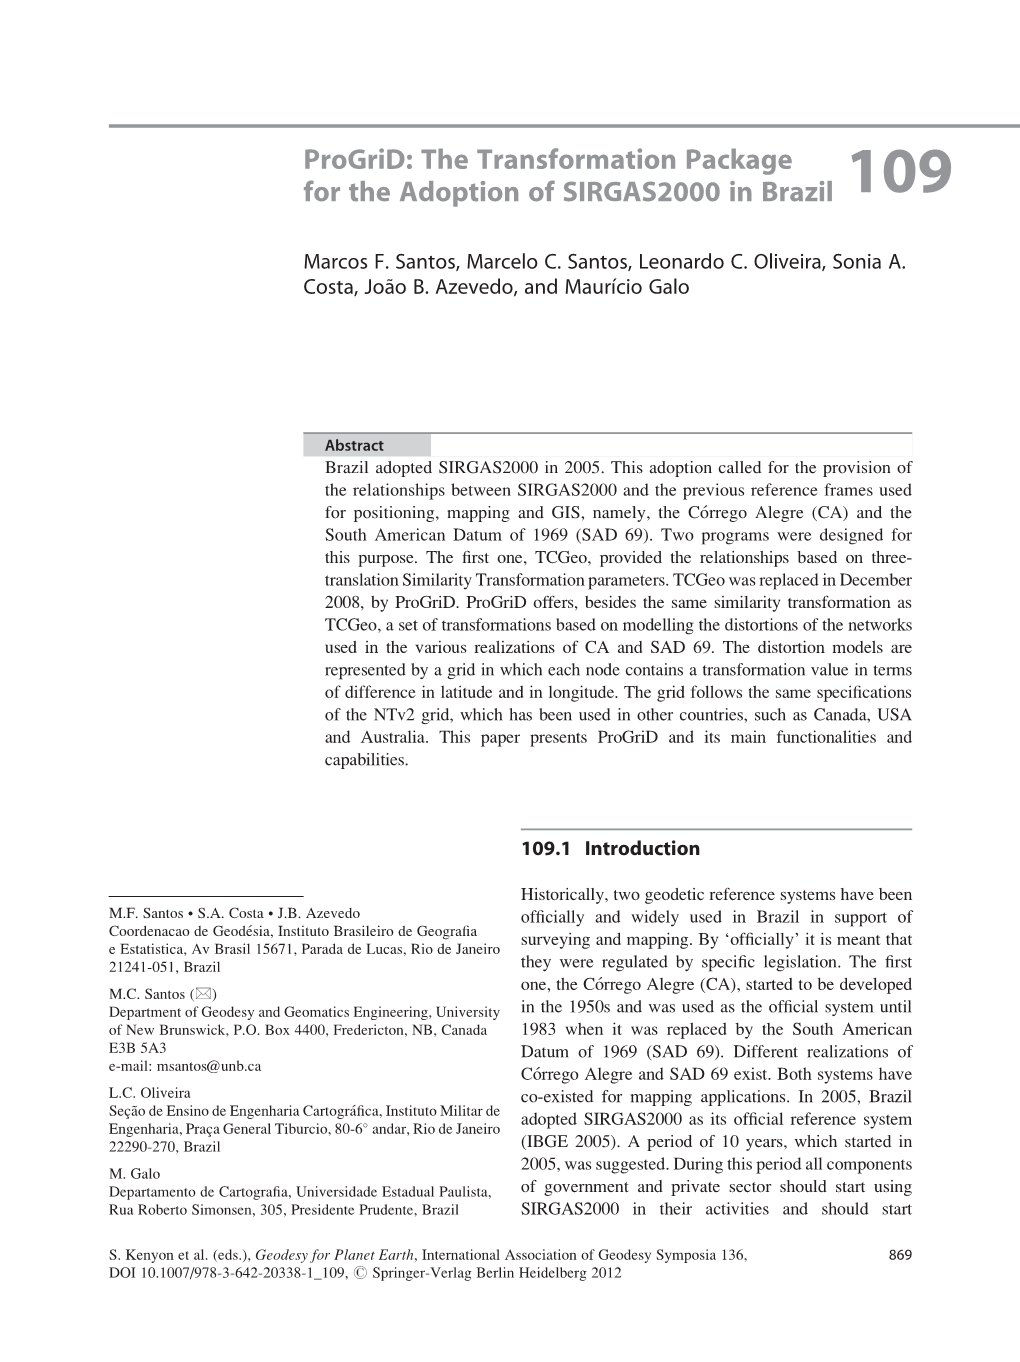 The Transformation Package for the Adoption of SIRGAS2000 in Brazil